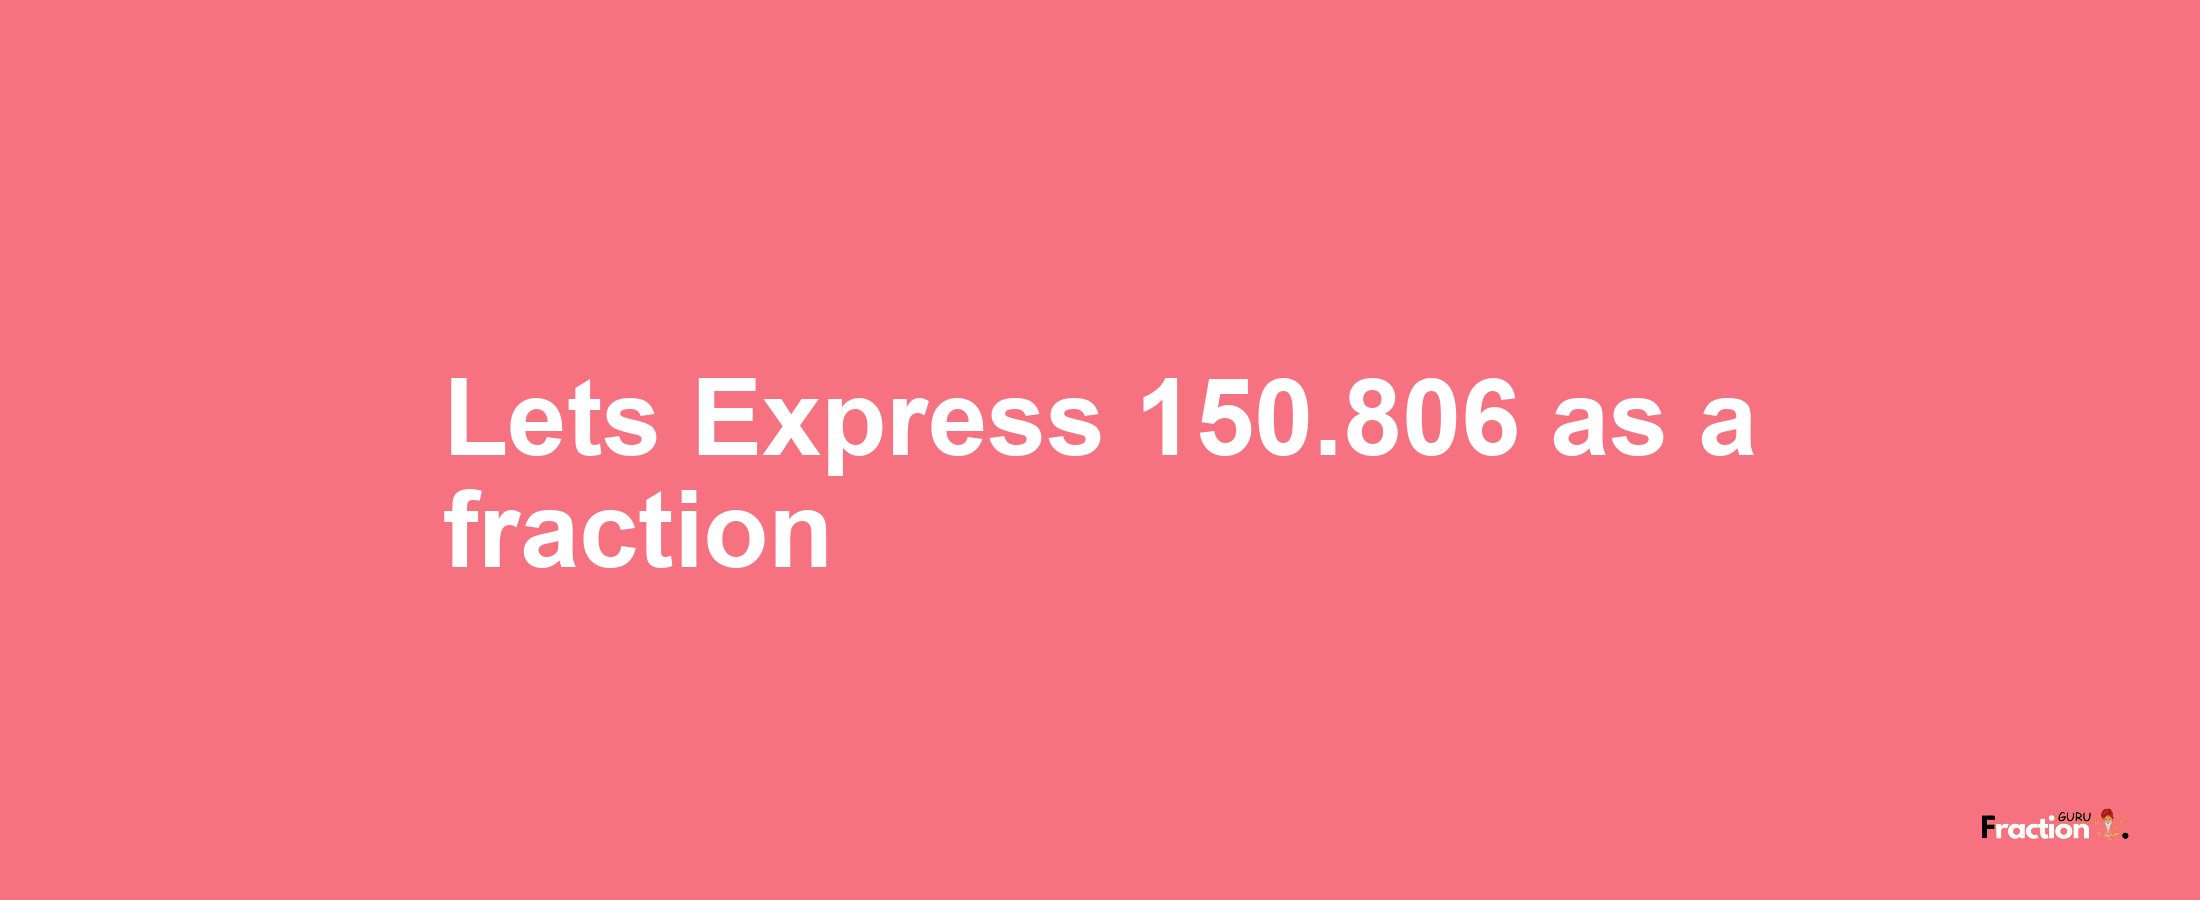 Lets Express 150.806 as afraction